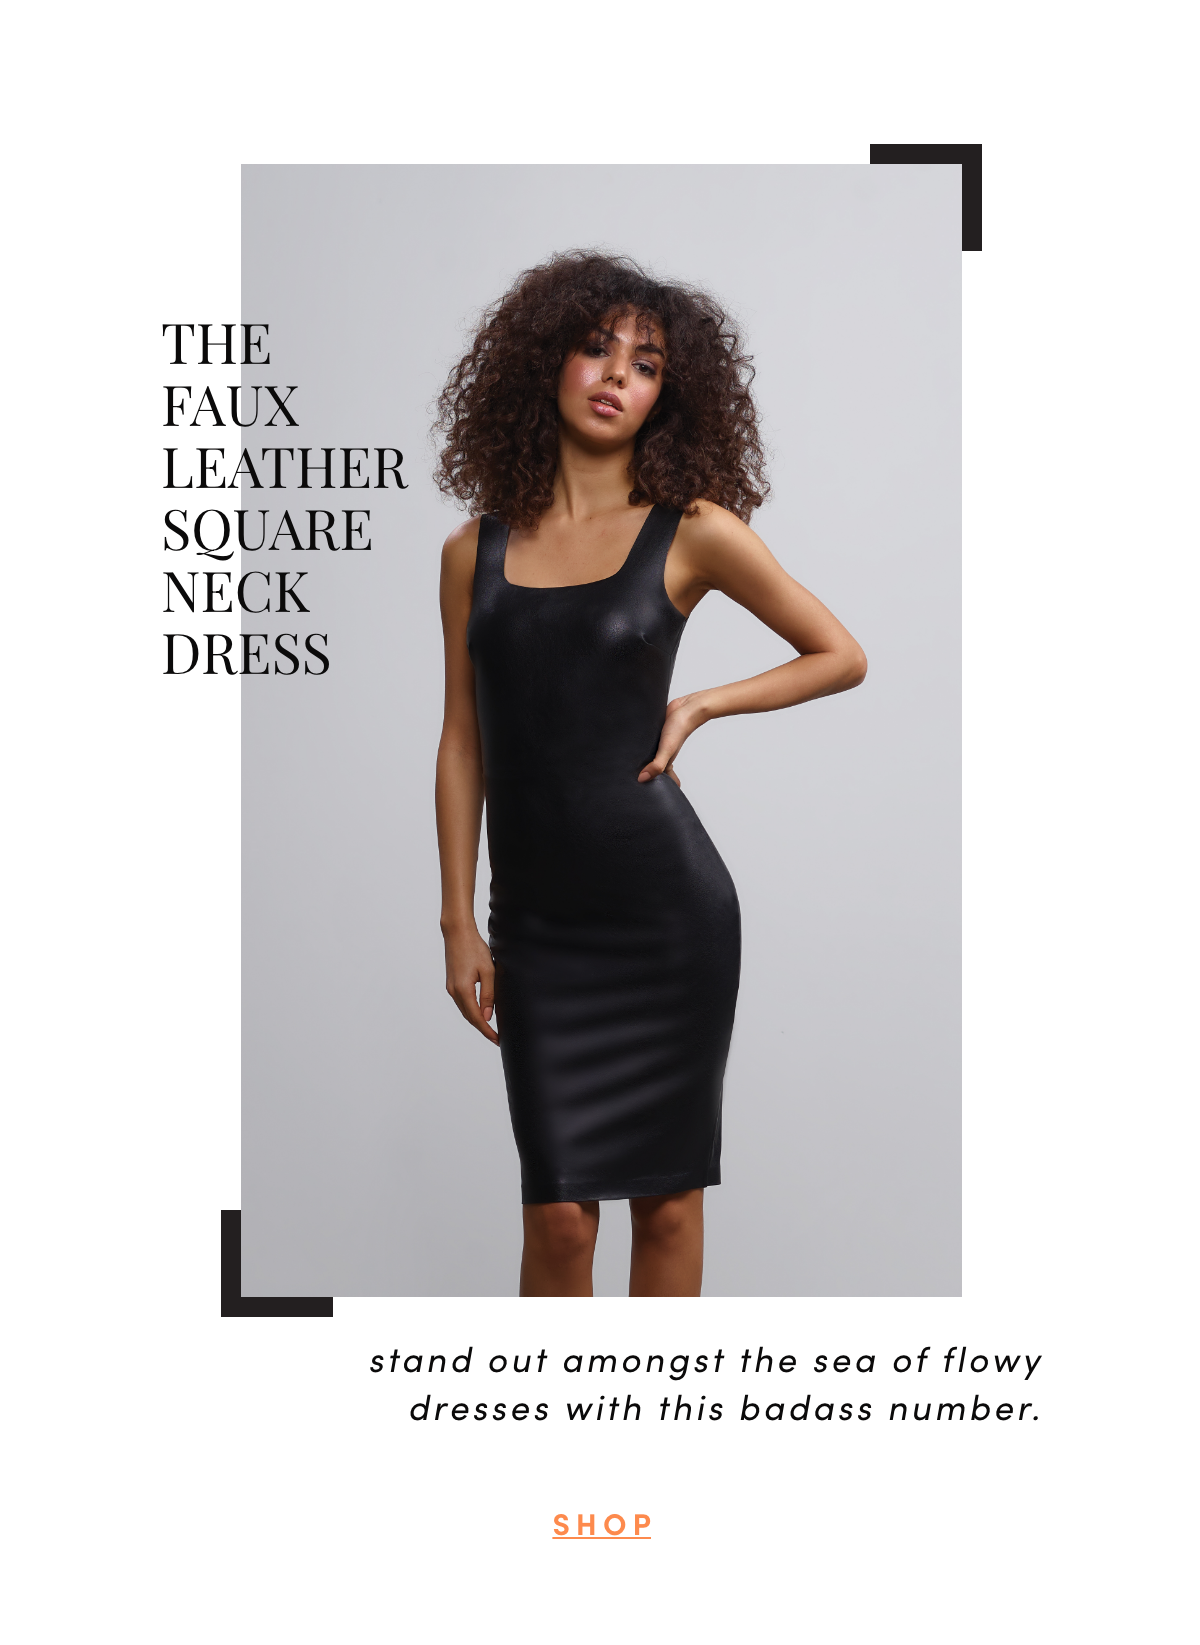 The Faux Leather Square Neck Dress